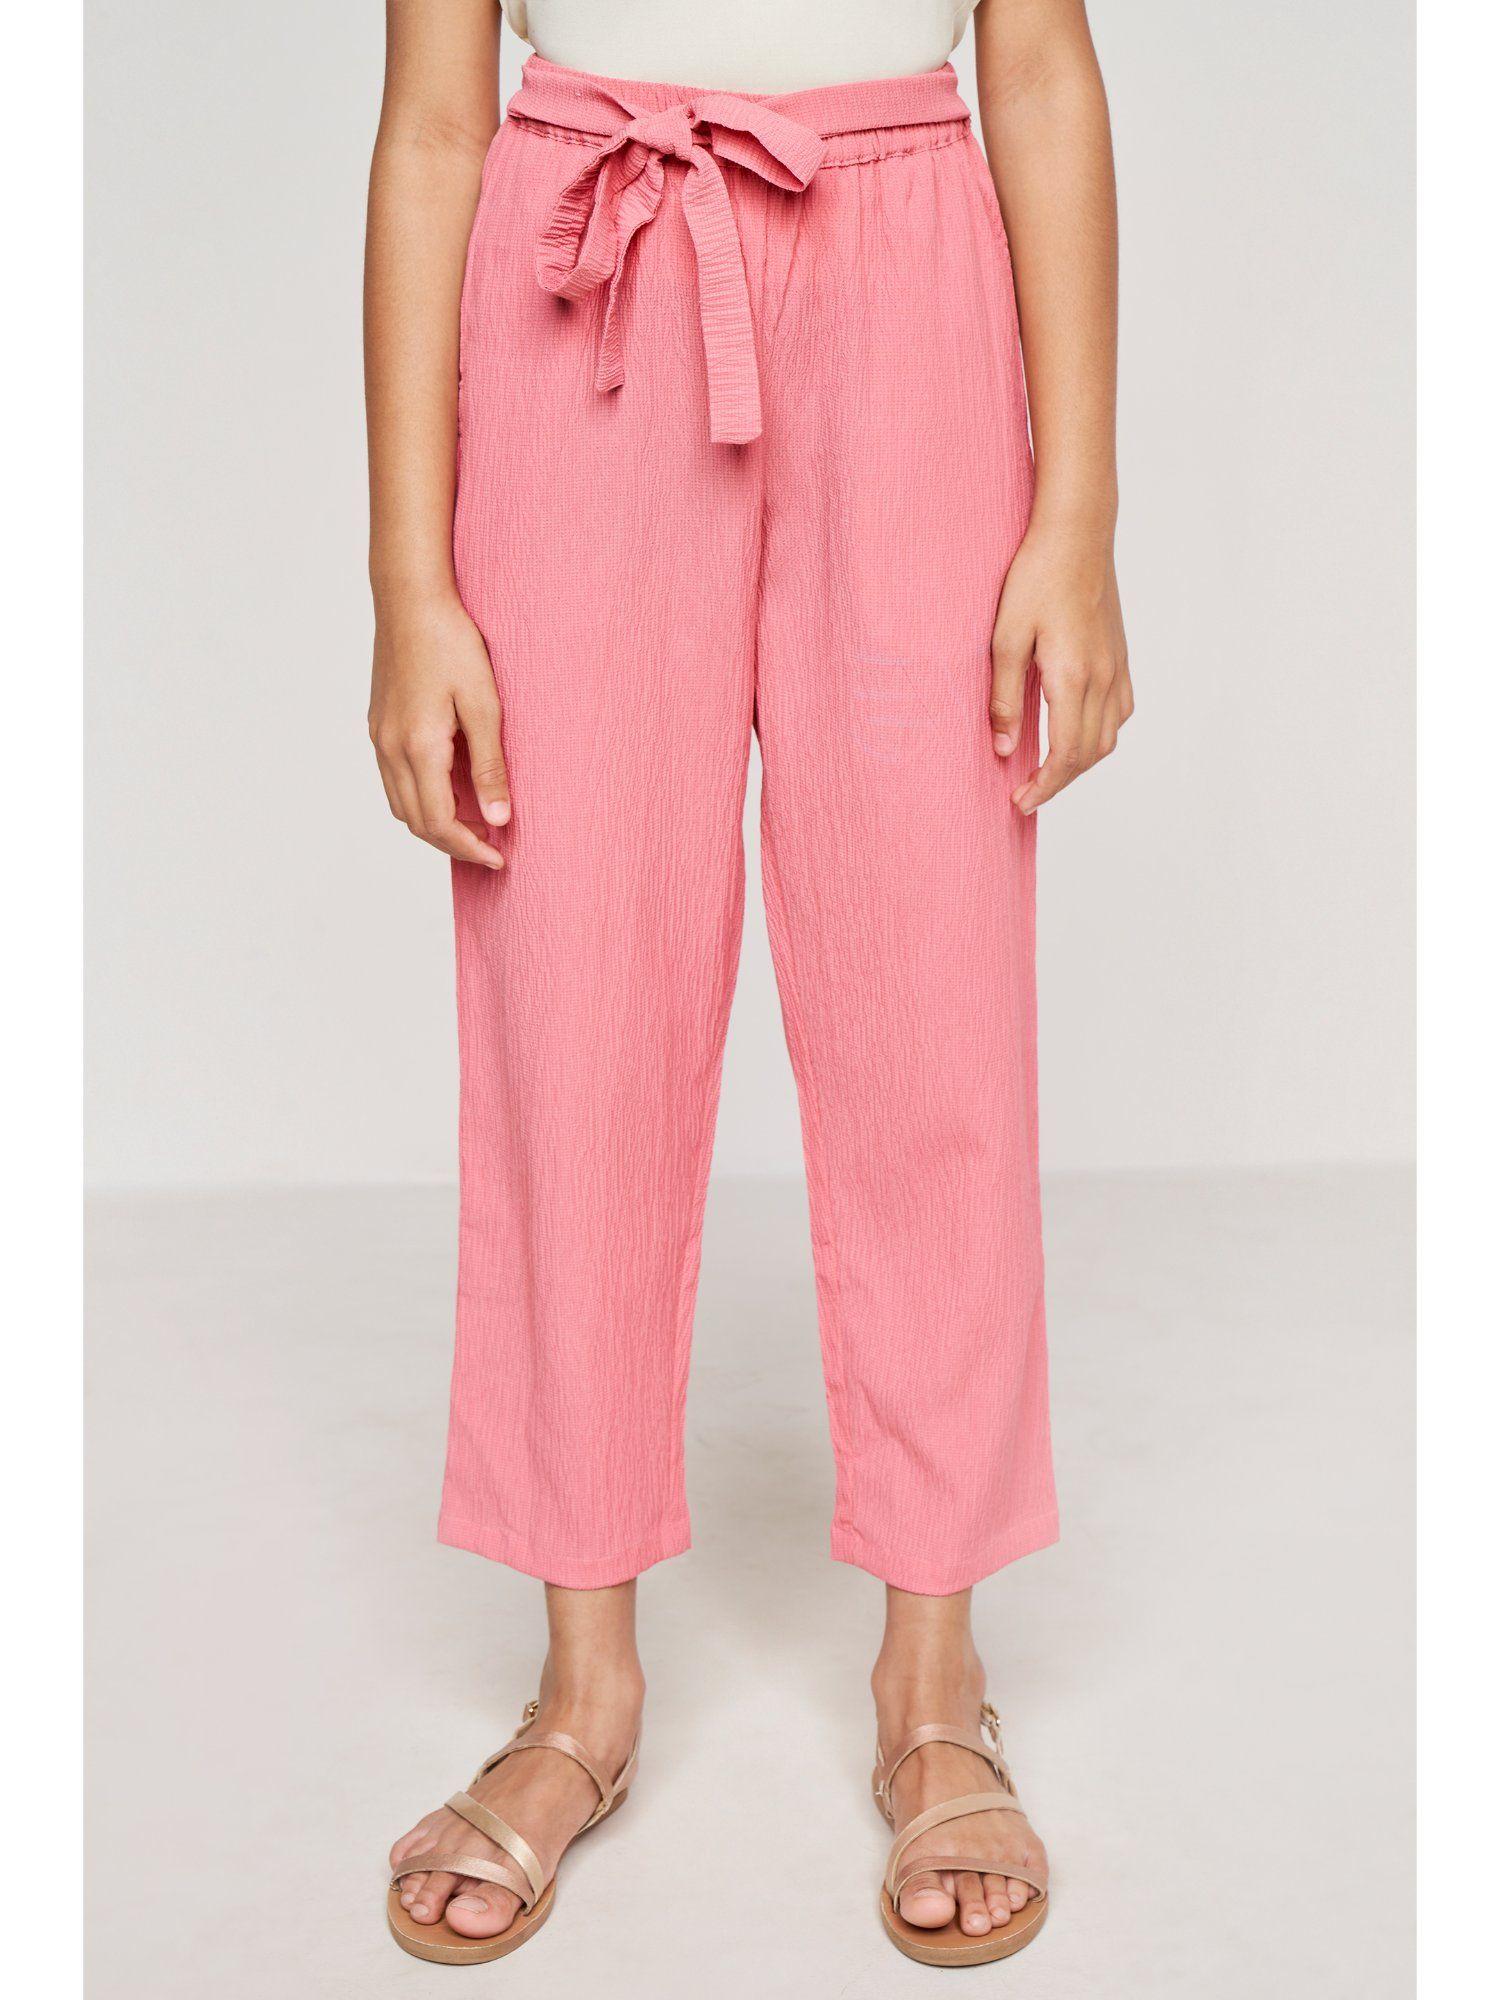 pink casual ethnic bottoms